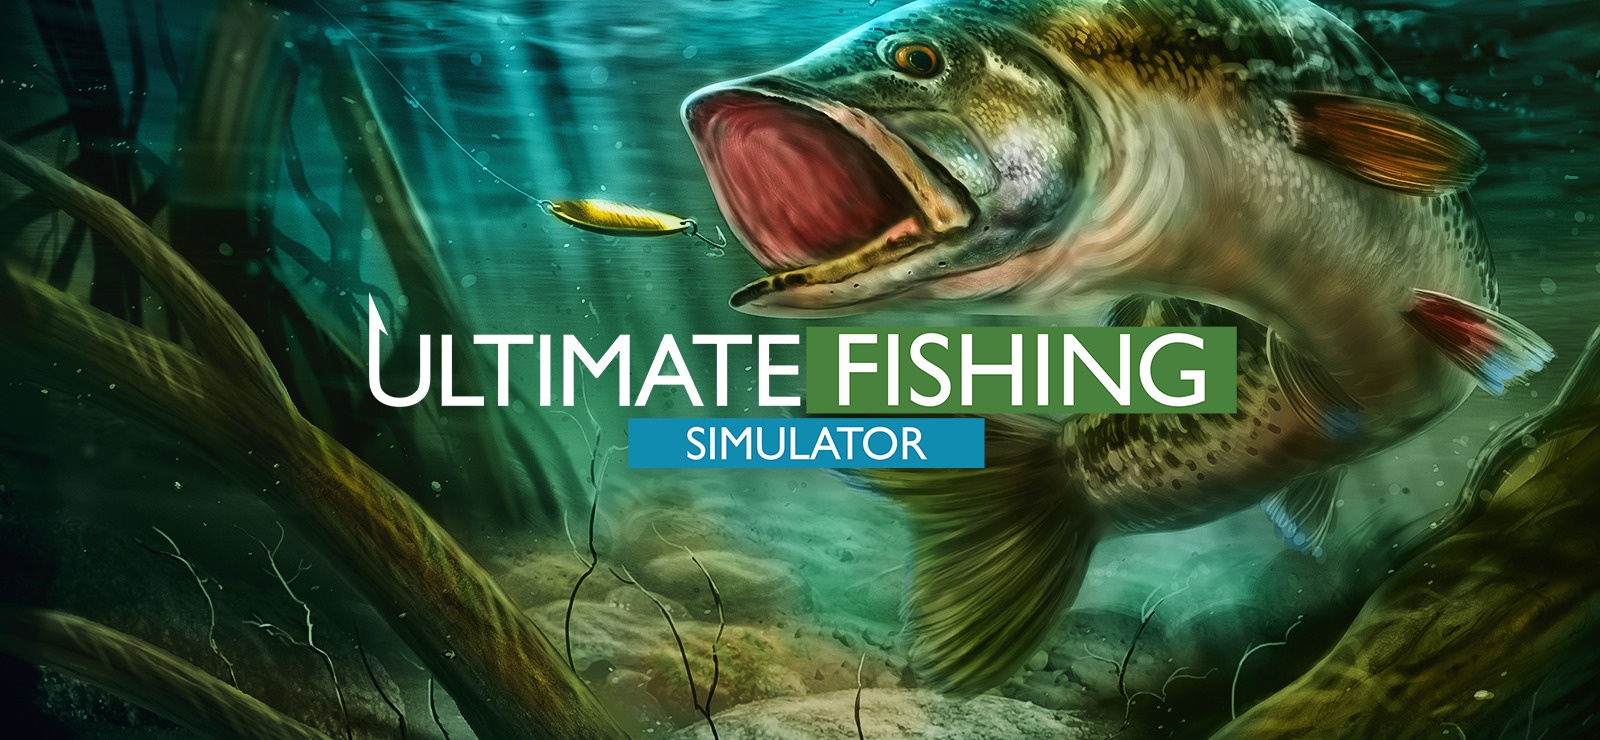 Ultimate Fishing Simulator PCVR Review – If There’s Better, Let Minnow.